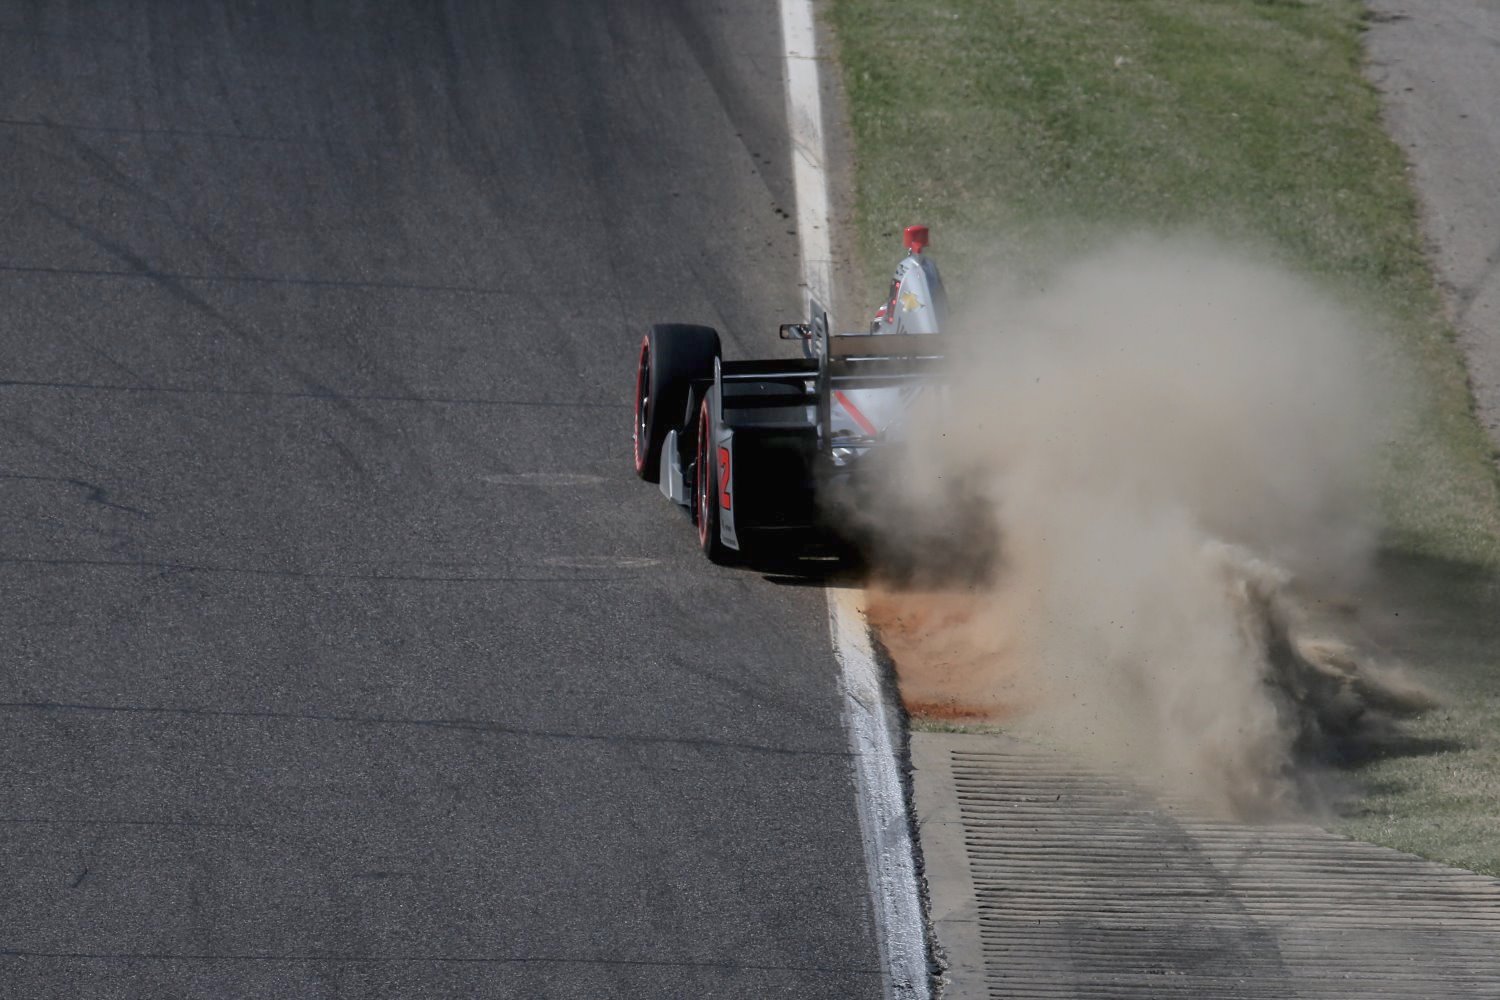 Will Power gets off into the dirt